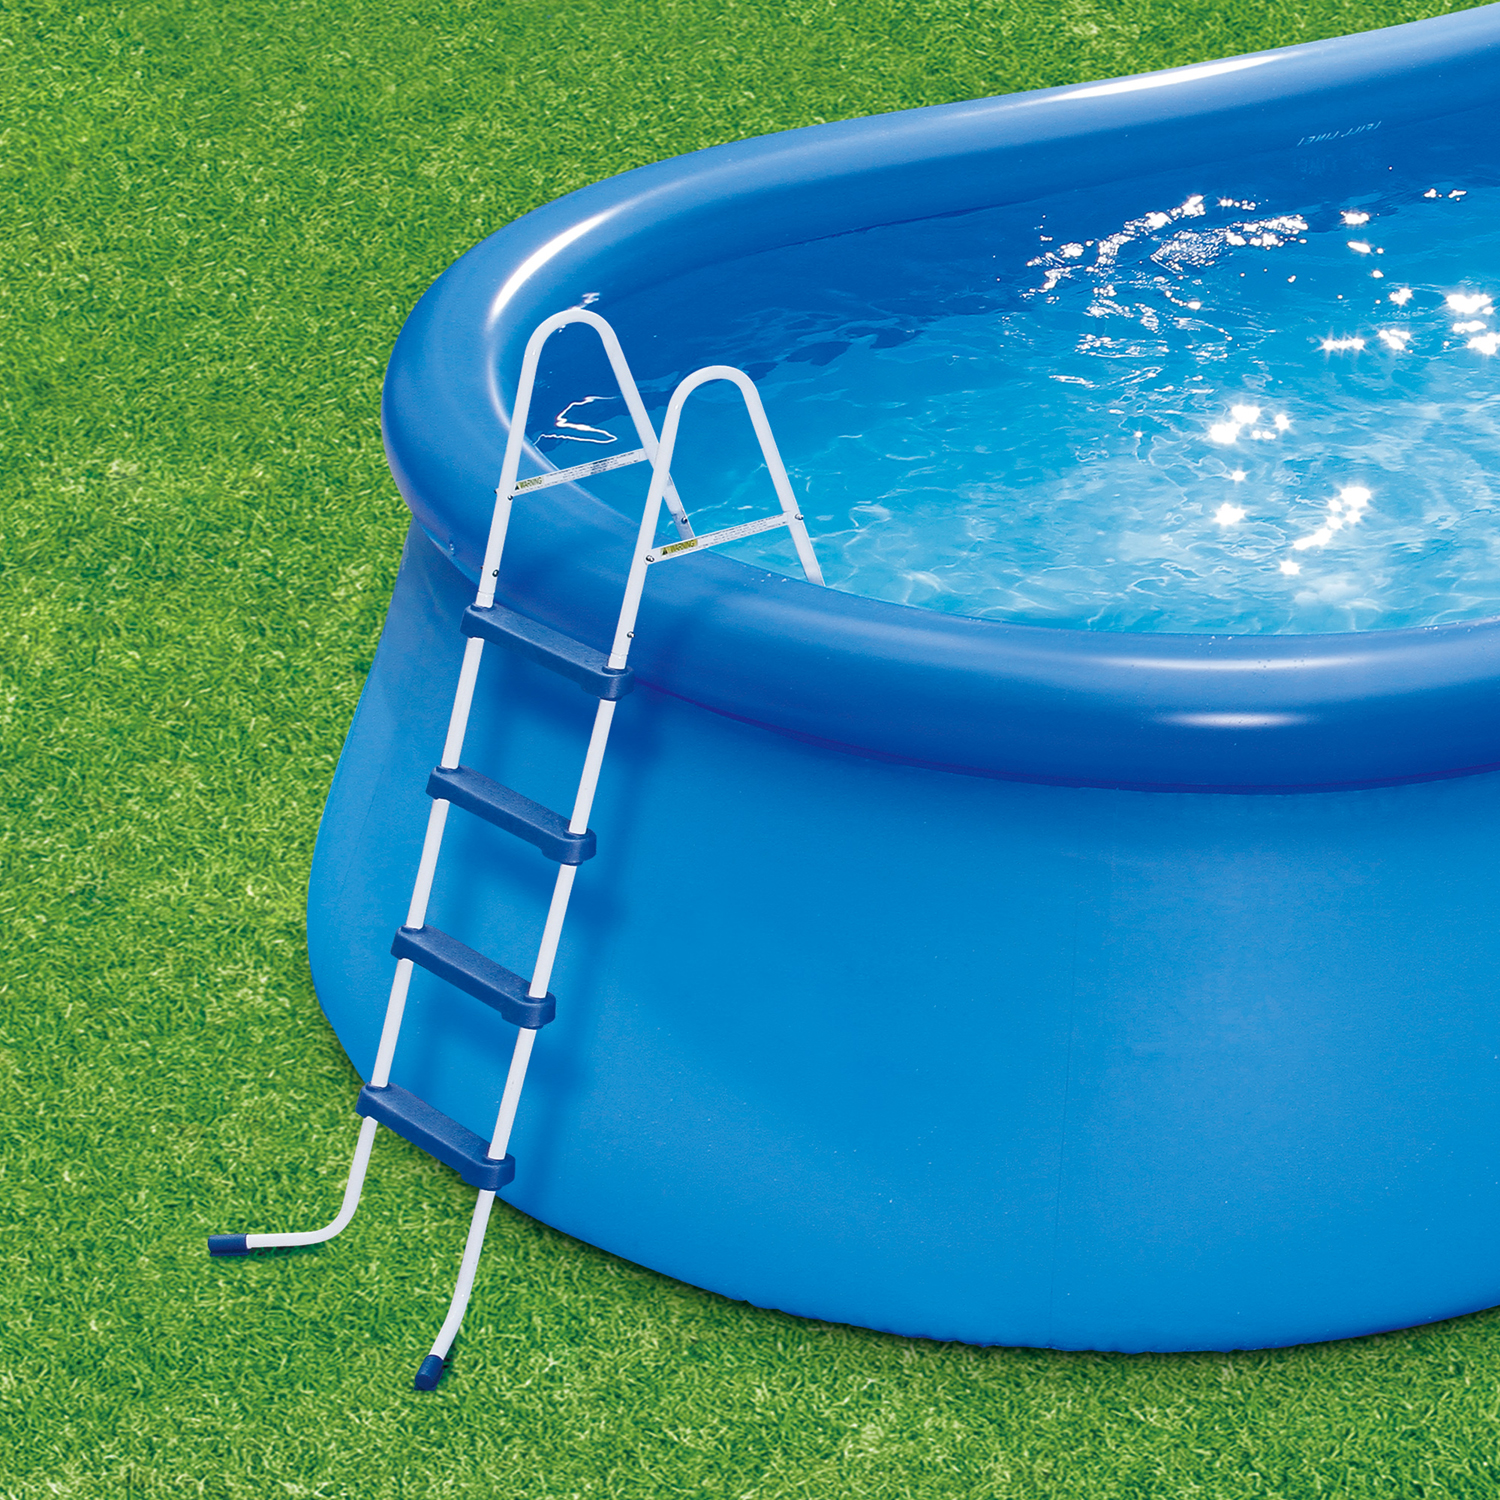 Summer Waves 20'x12'x48" Quick Set Oval Frame Swimming Pool - image 5 of 11